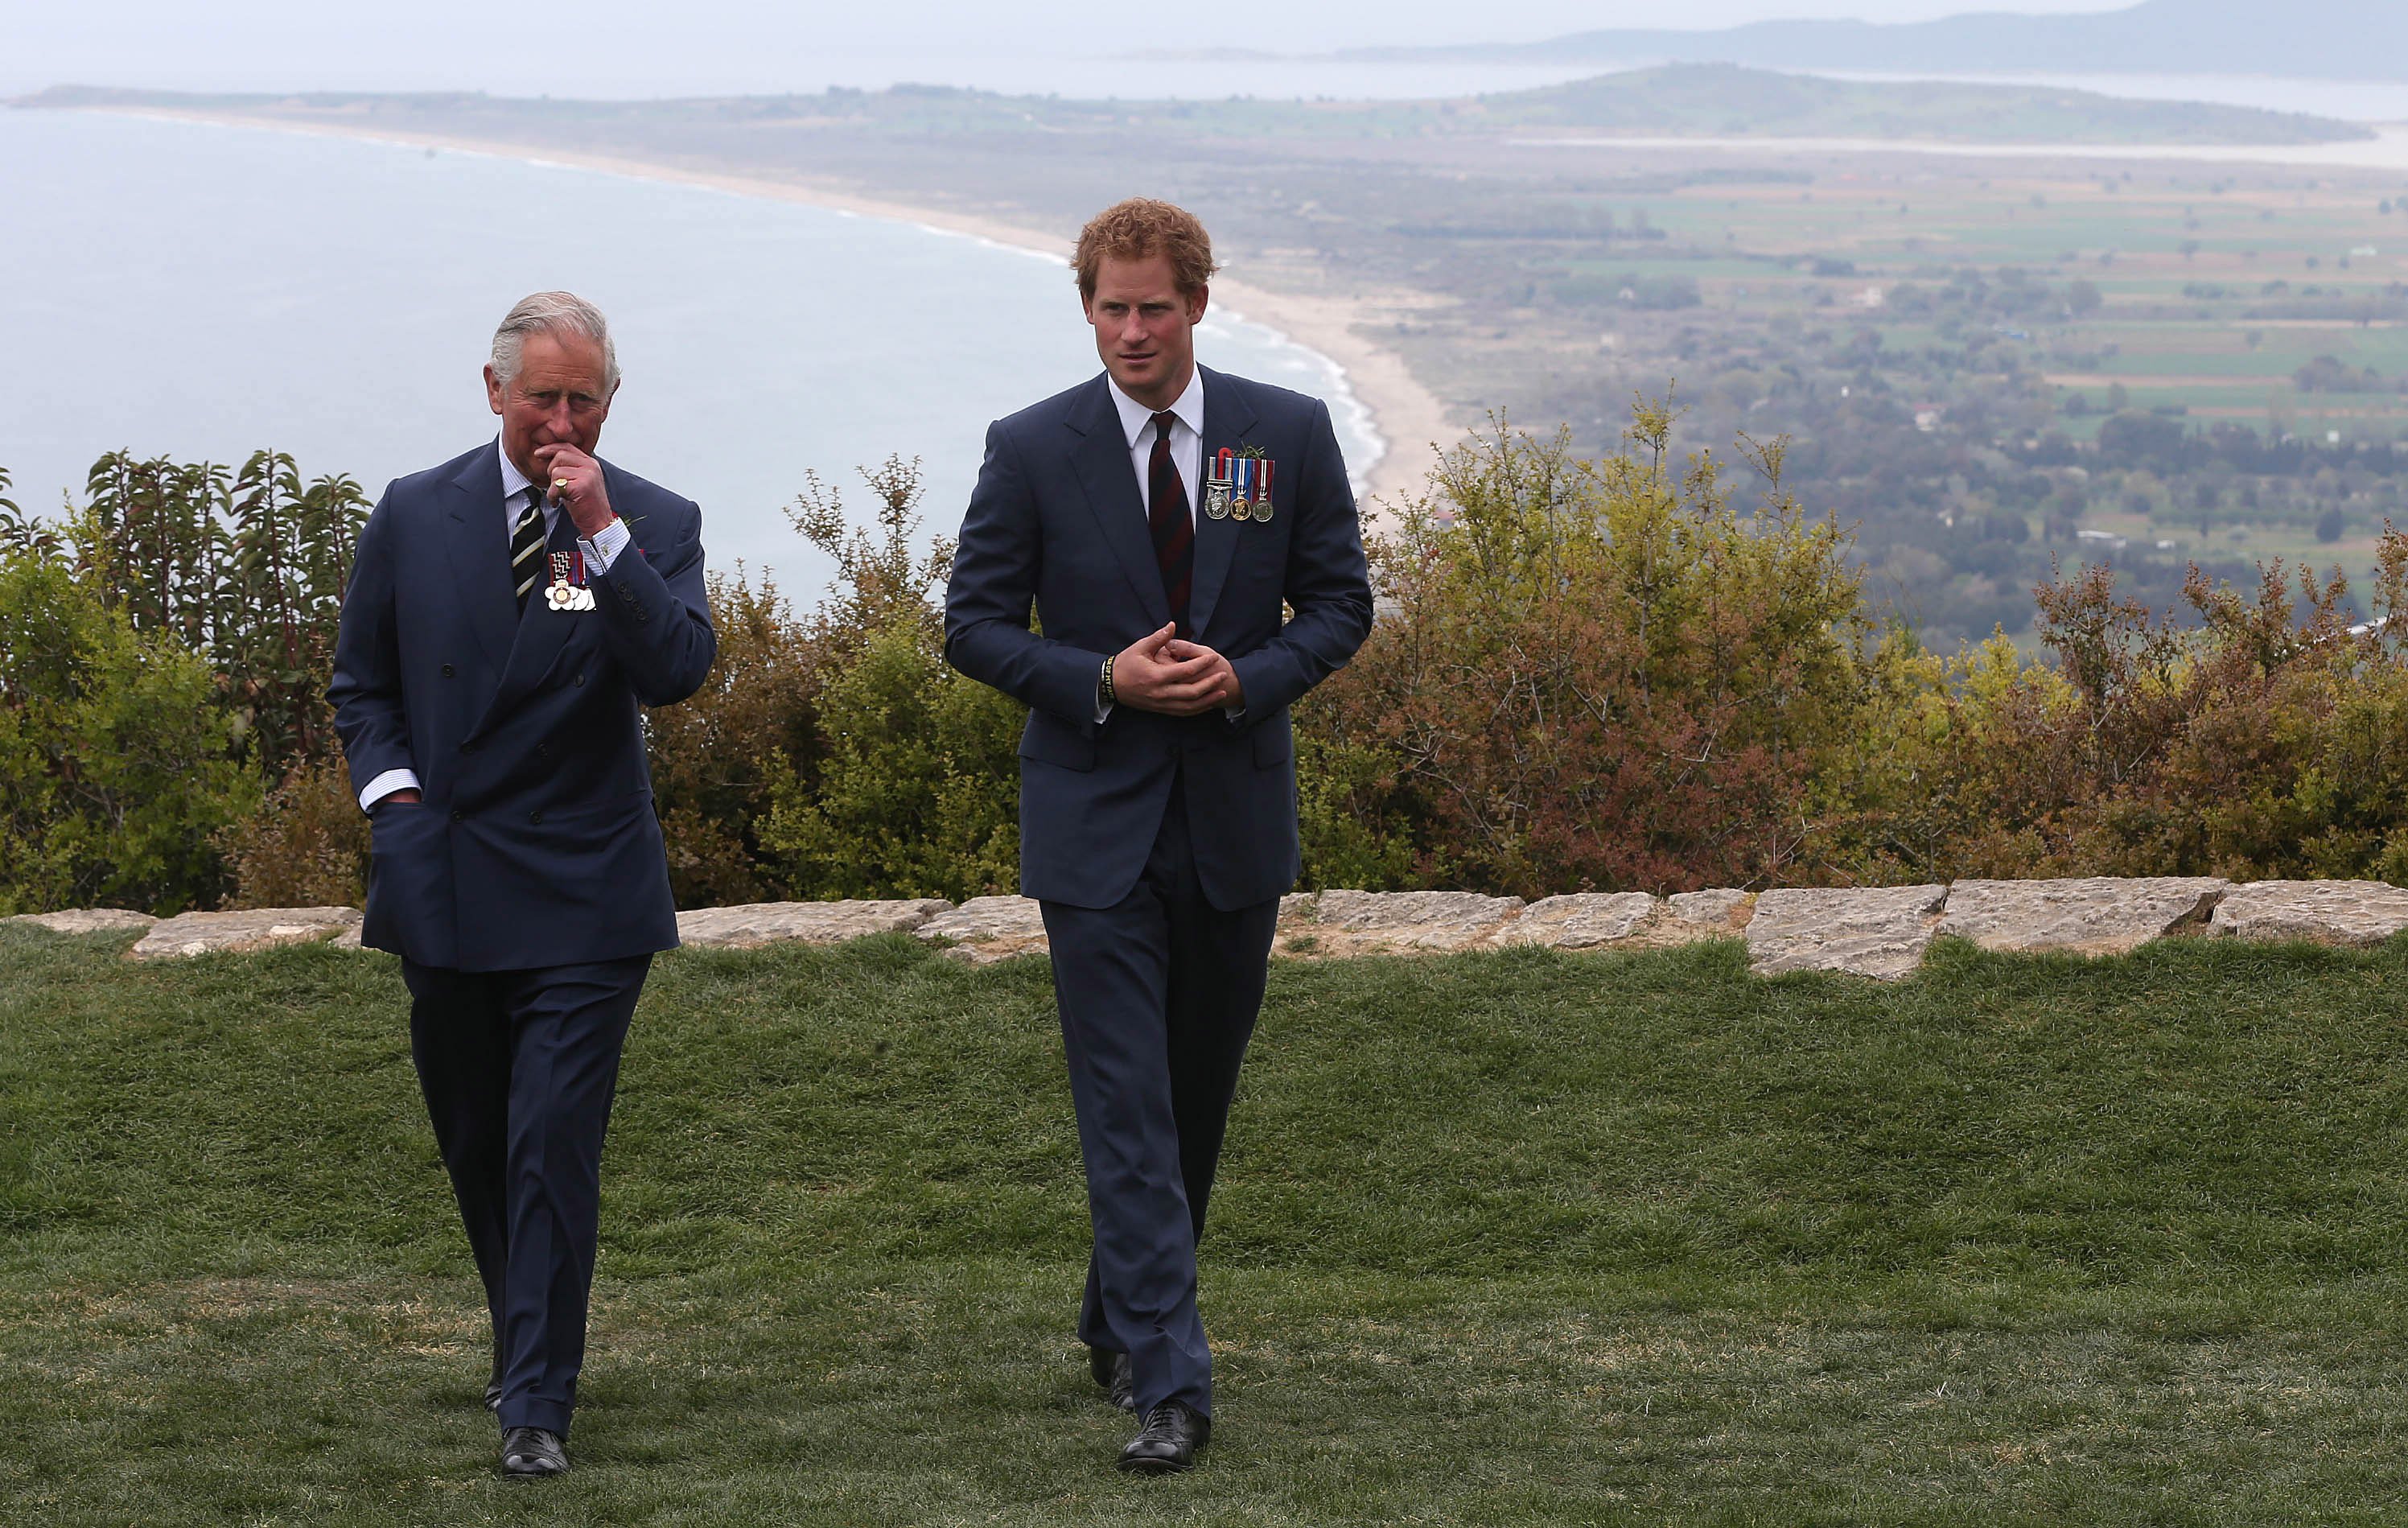 Prince Harry chats with King Charles III during a visit to The Nek, a narrow stretch of a ridge in the Anzac battlefield on the Gallipoli Peninsula, as part of commemorations marking the 100th anniversary of the Battle of Gallipoli on April 25, 2015, in Gallipoli, Turkey. | Source: Getty Images 